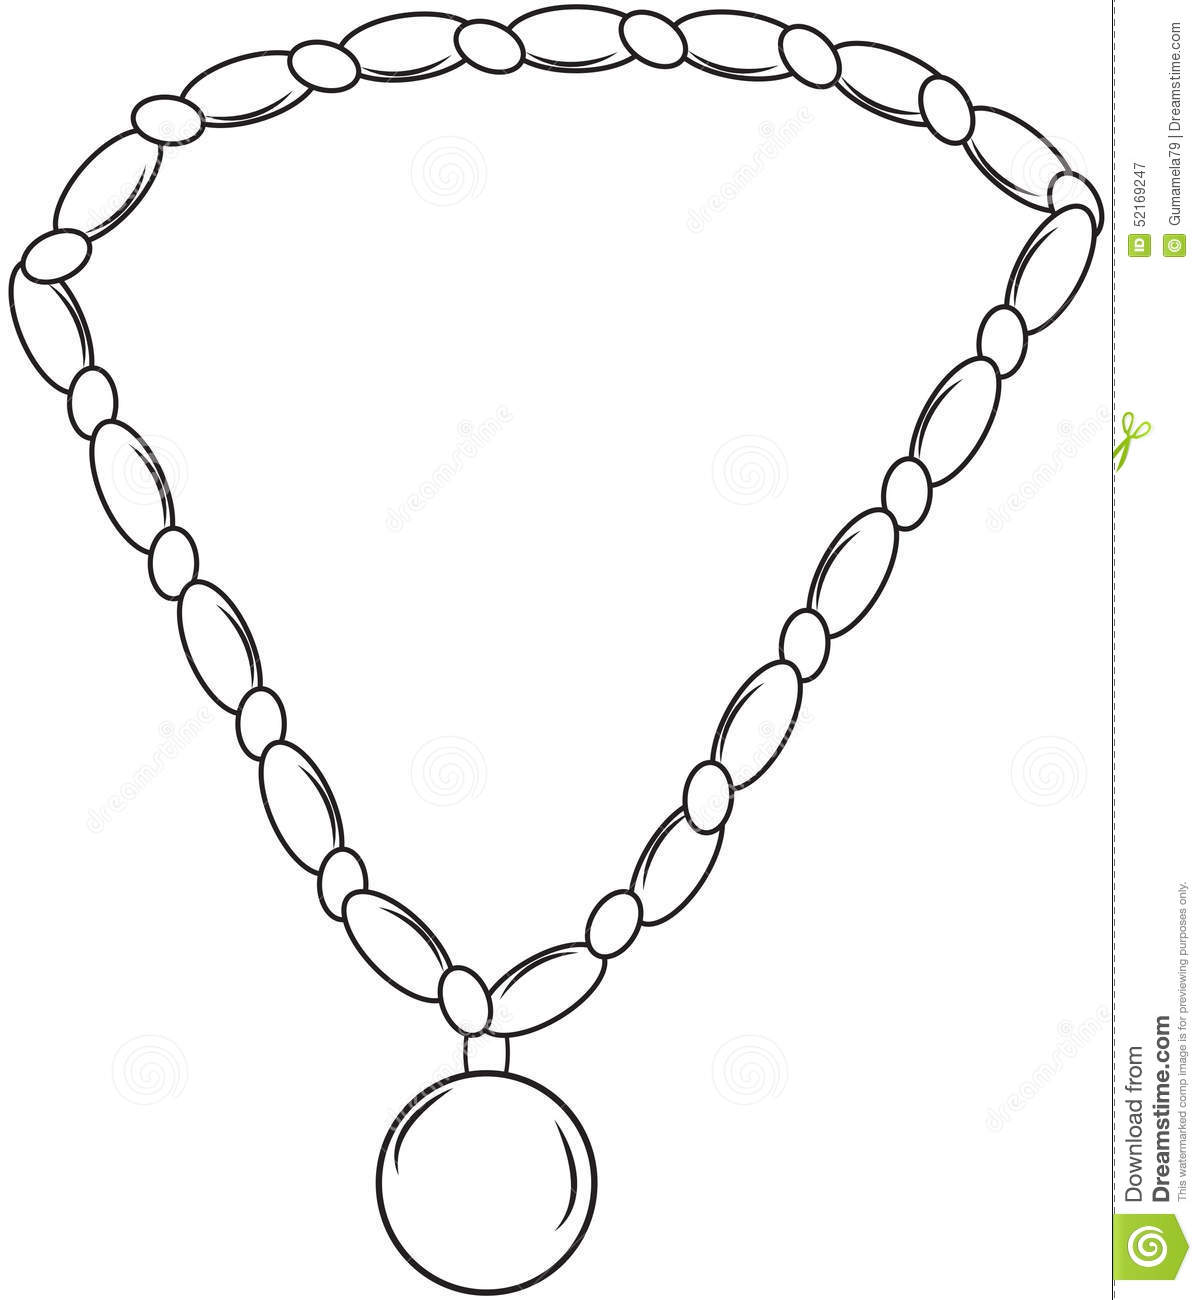 Necklace coloring, Download Necklace coloring for free 2019